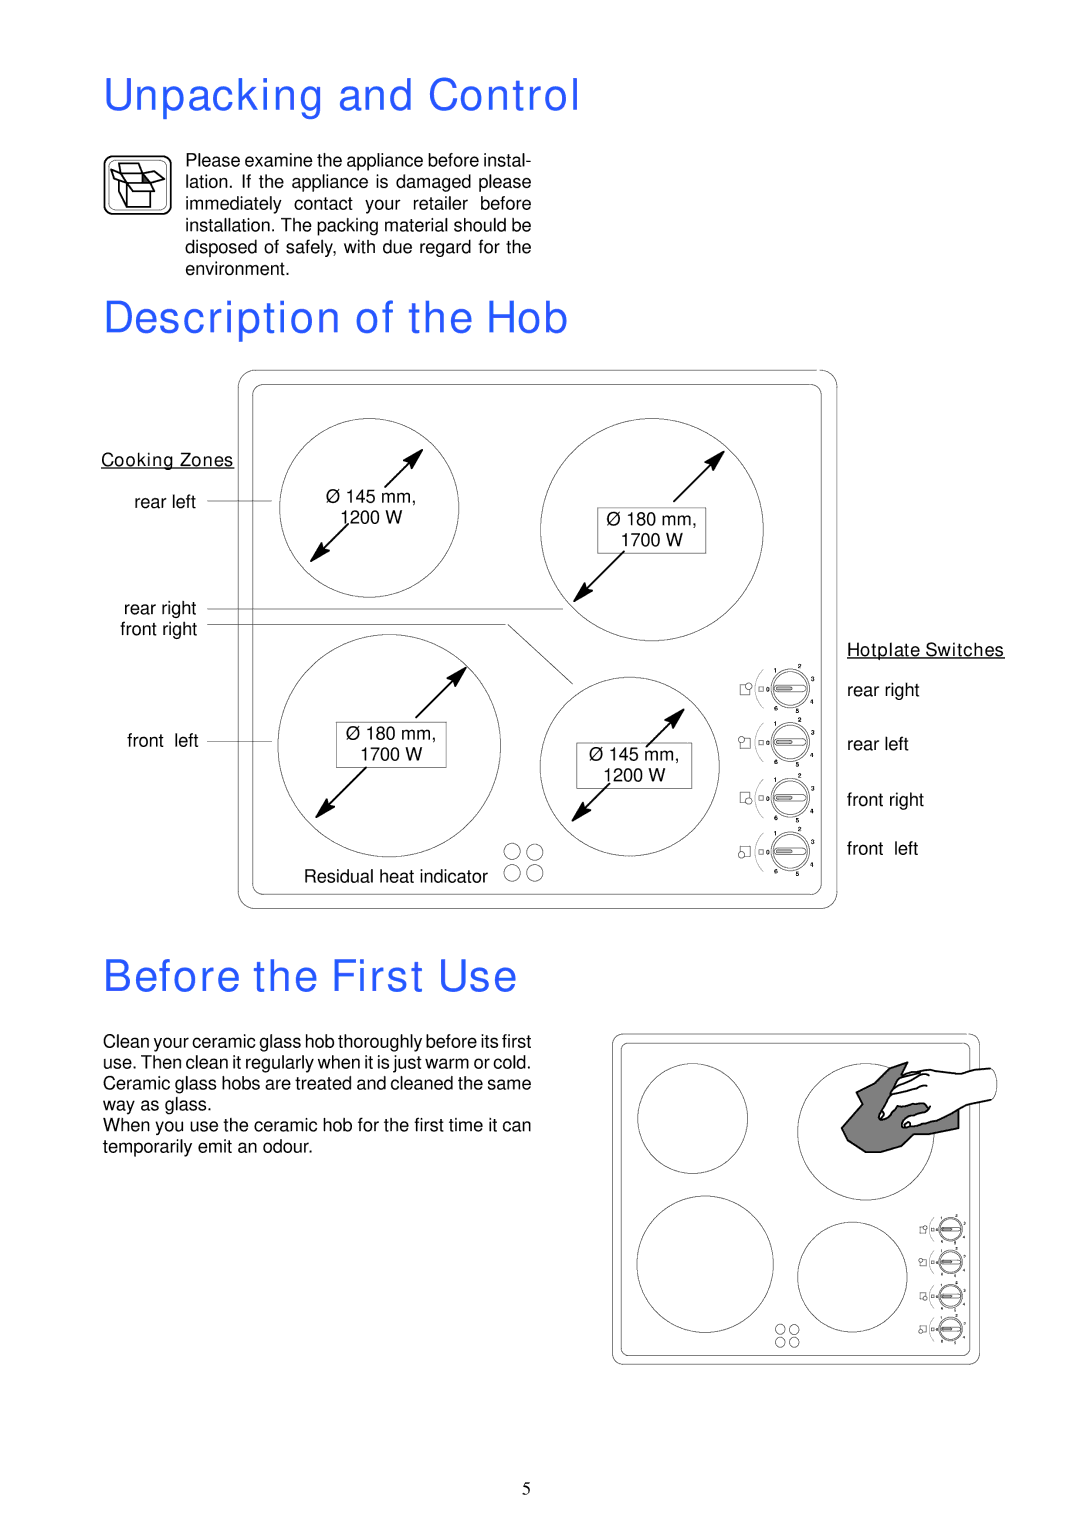 Electrolux U20452 manual Unpacking and Control, Description of the Hob, Before the First Use 